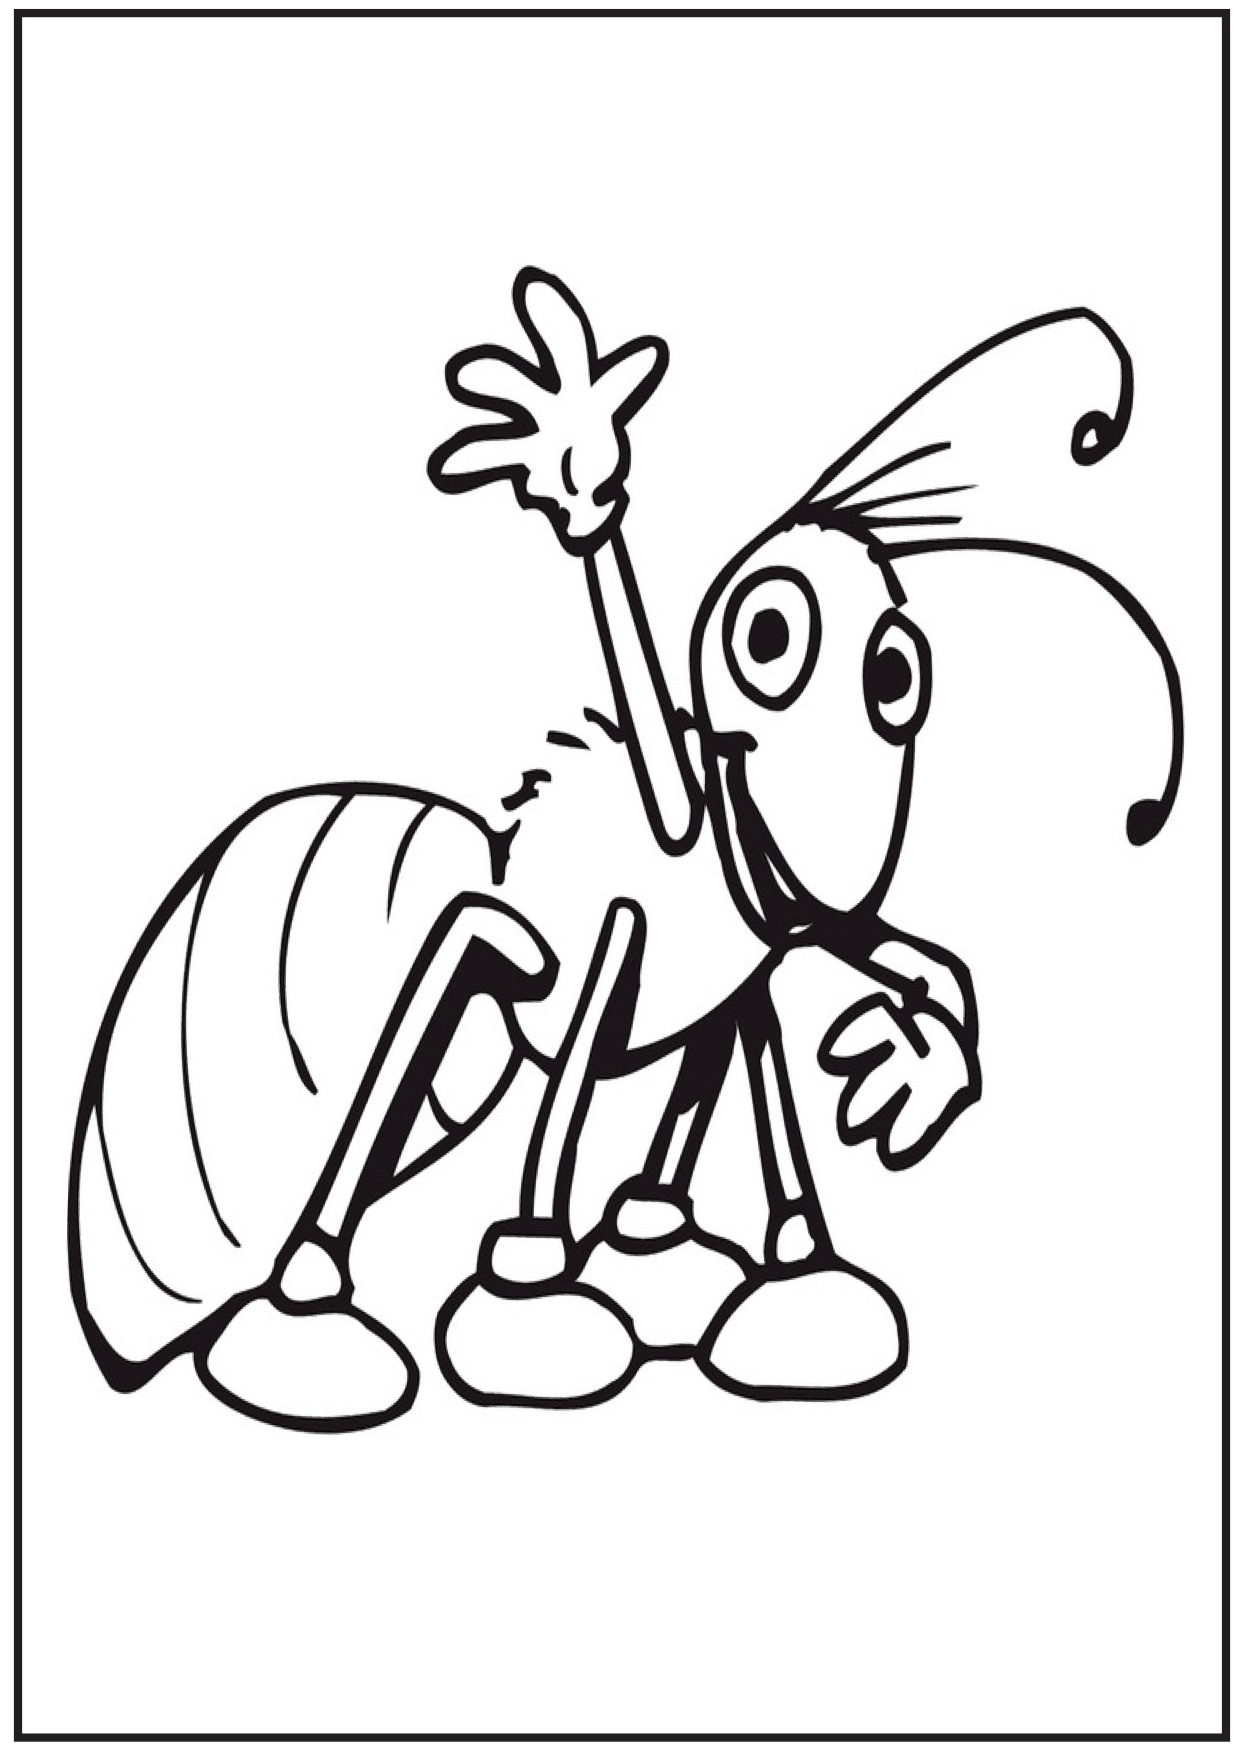 Simple Atom Ant Coloring Pages for Kindergarten